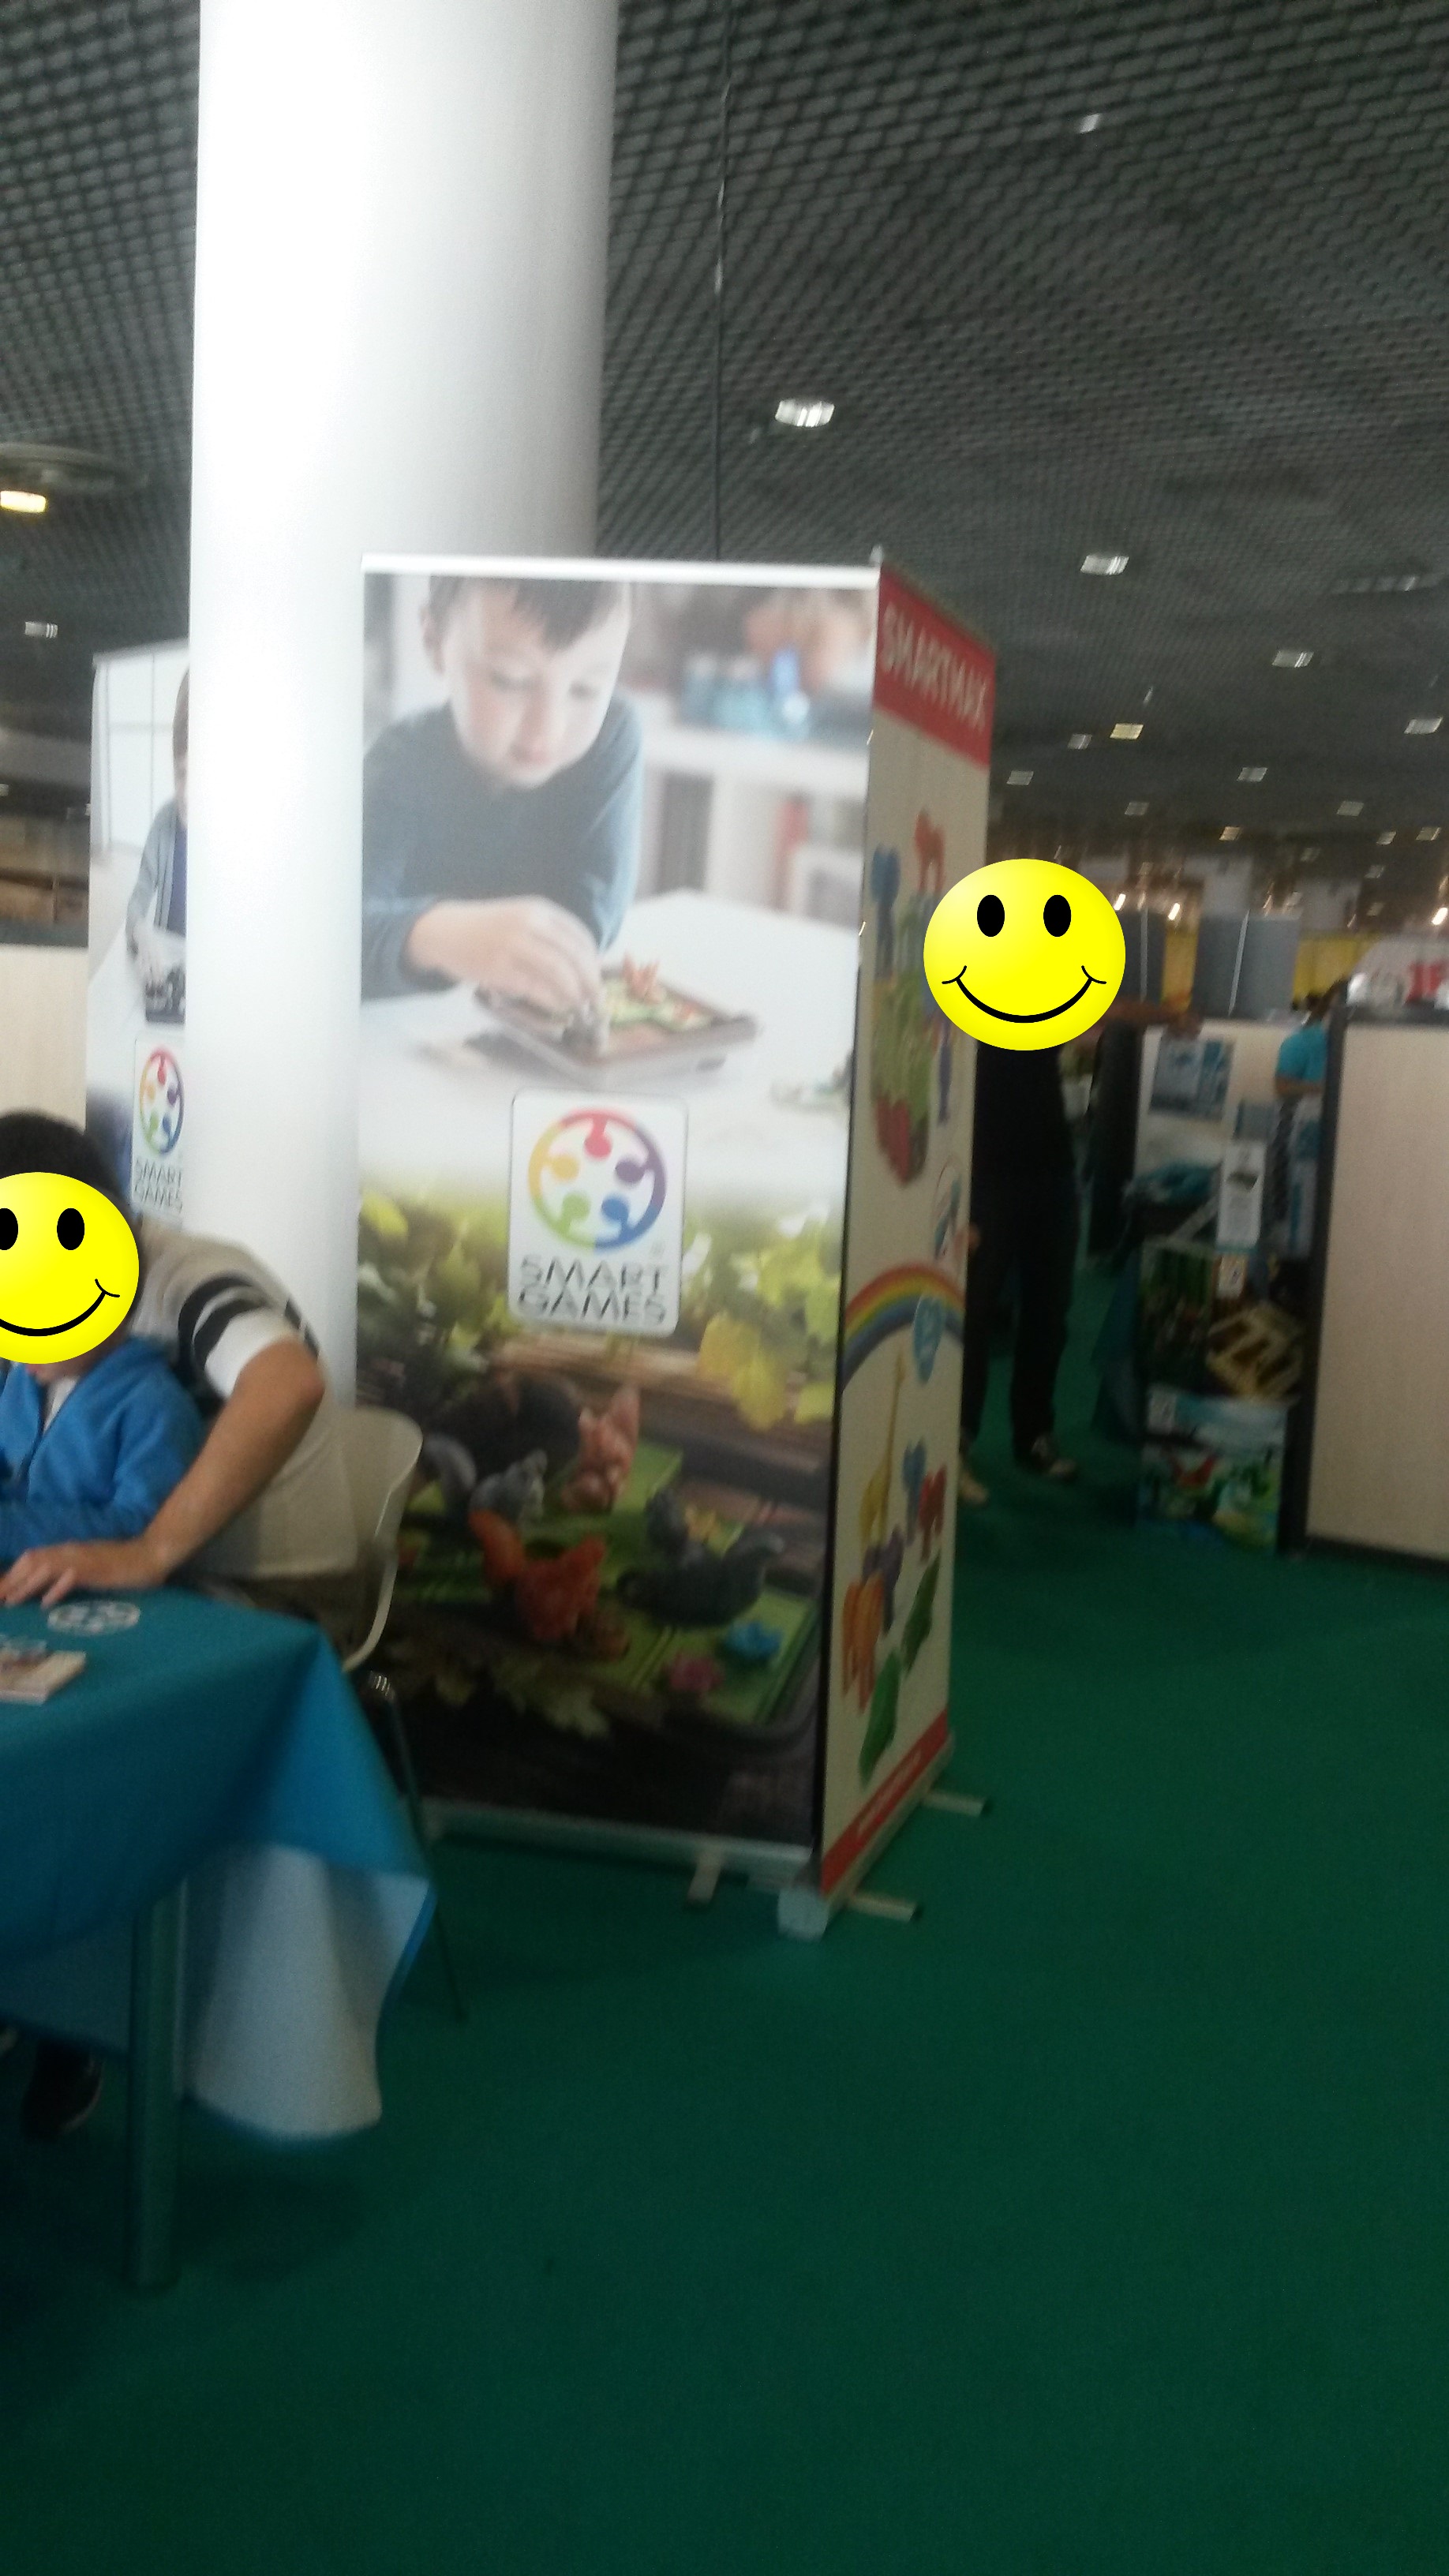 Smart Games came to present its games